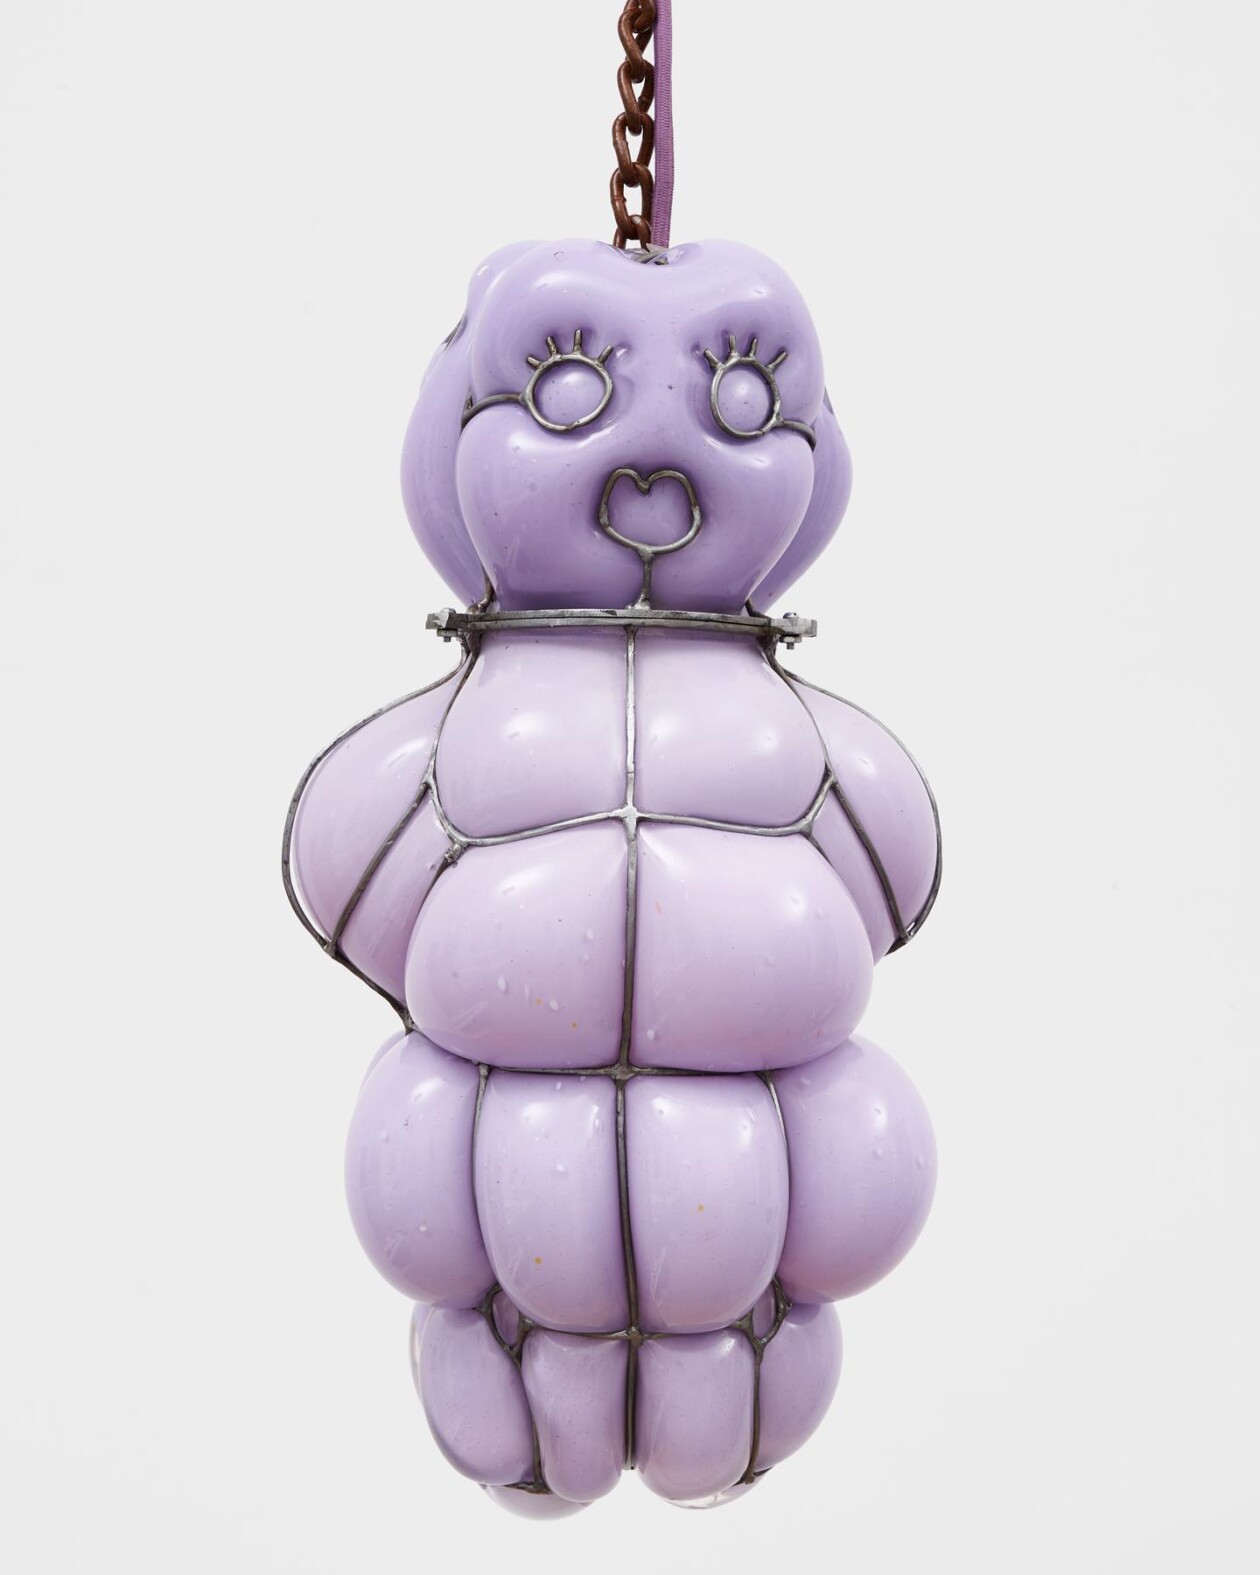 Sculptural Glass Pendants Of Otherworldly Blob Creatures By Katie Stout (9)